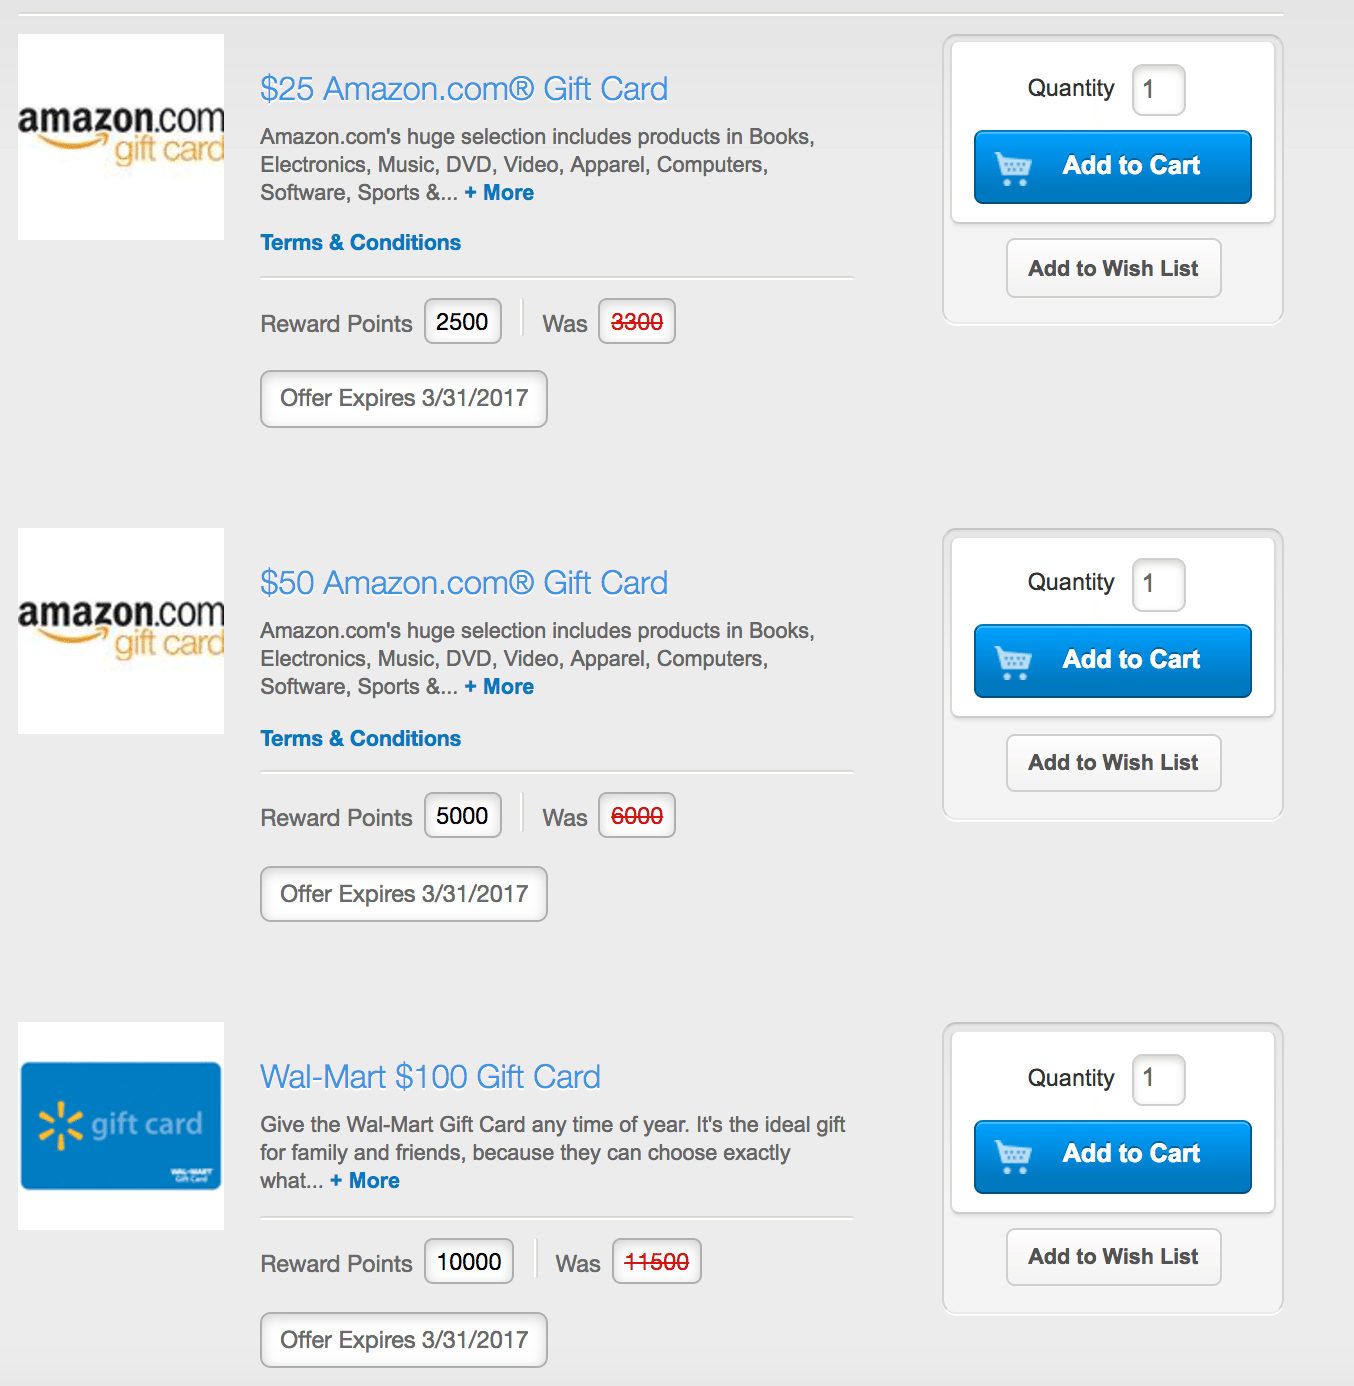 Can I pay with only eBay gift cards without a cred - The eBay Community